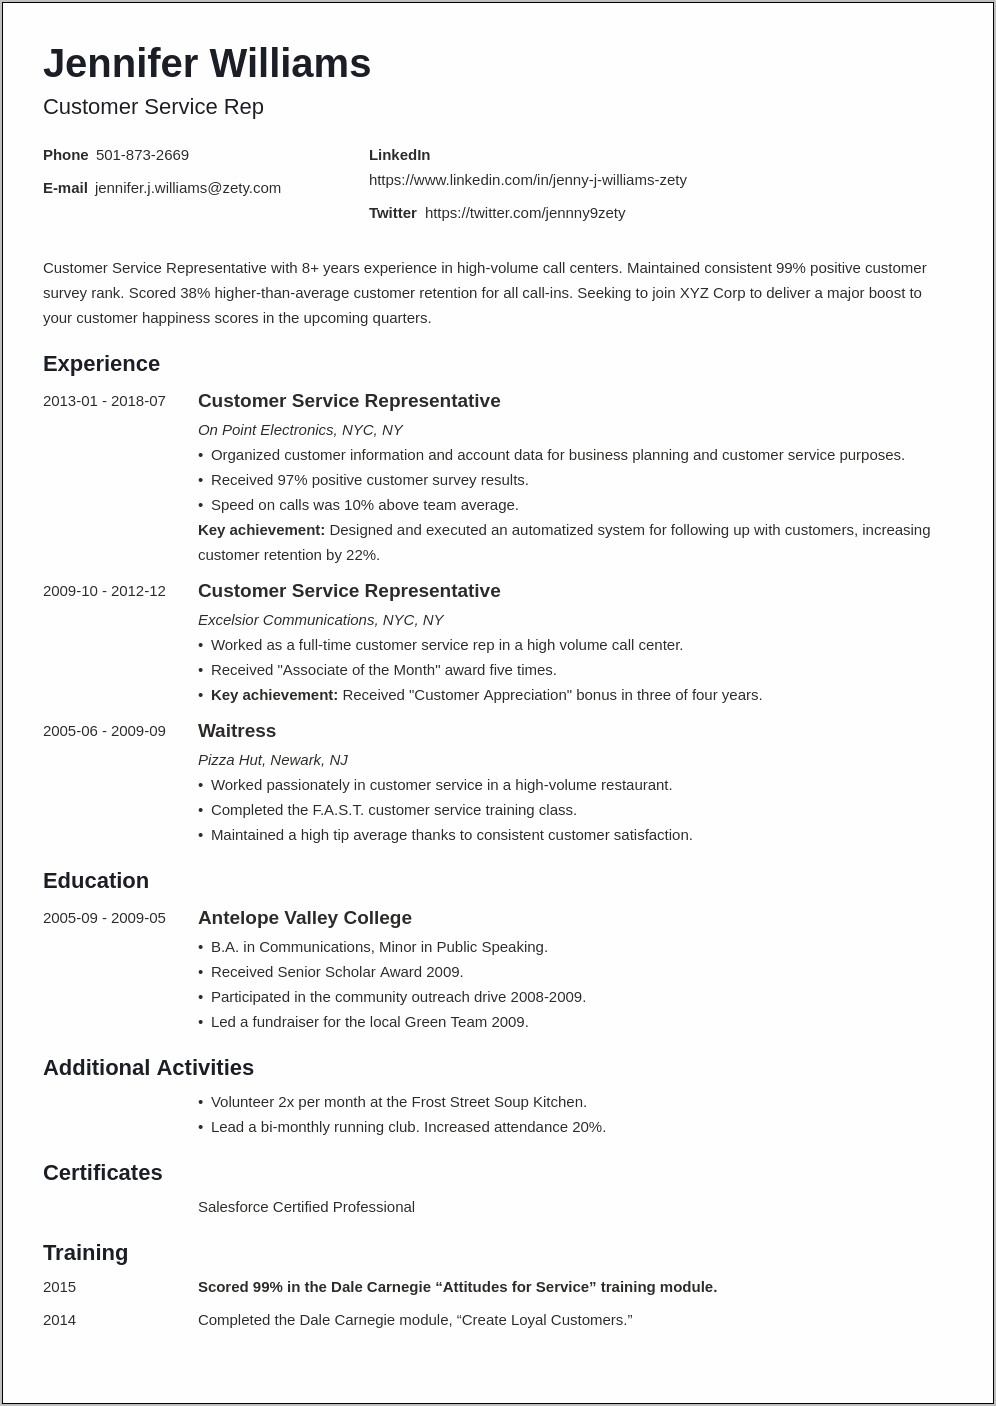 Should I Include Non Related Work On Resume